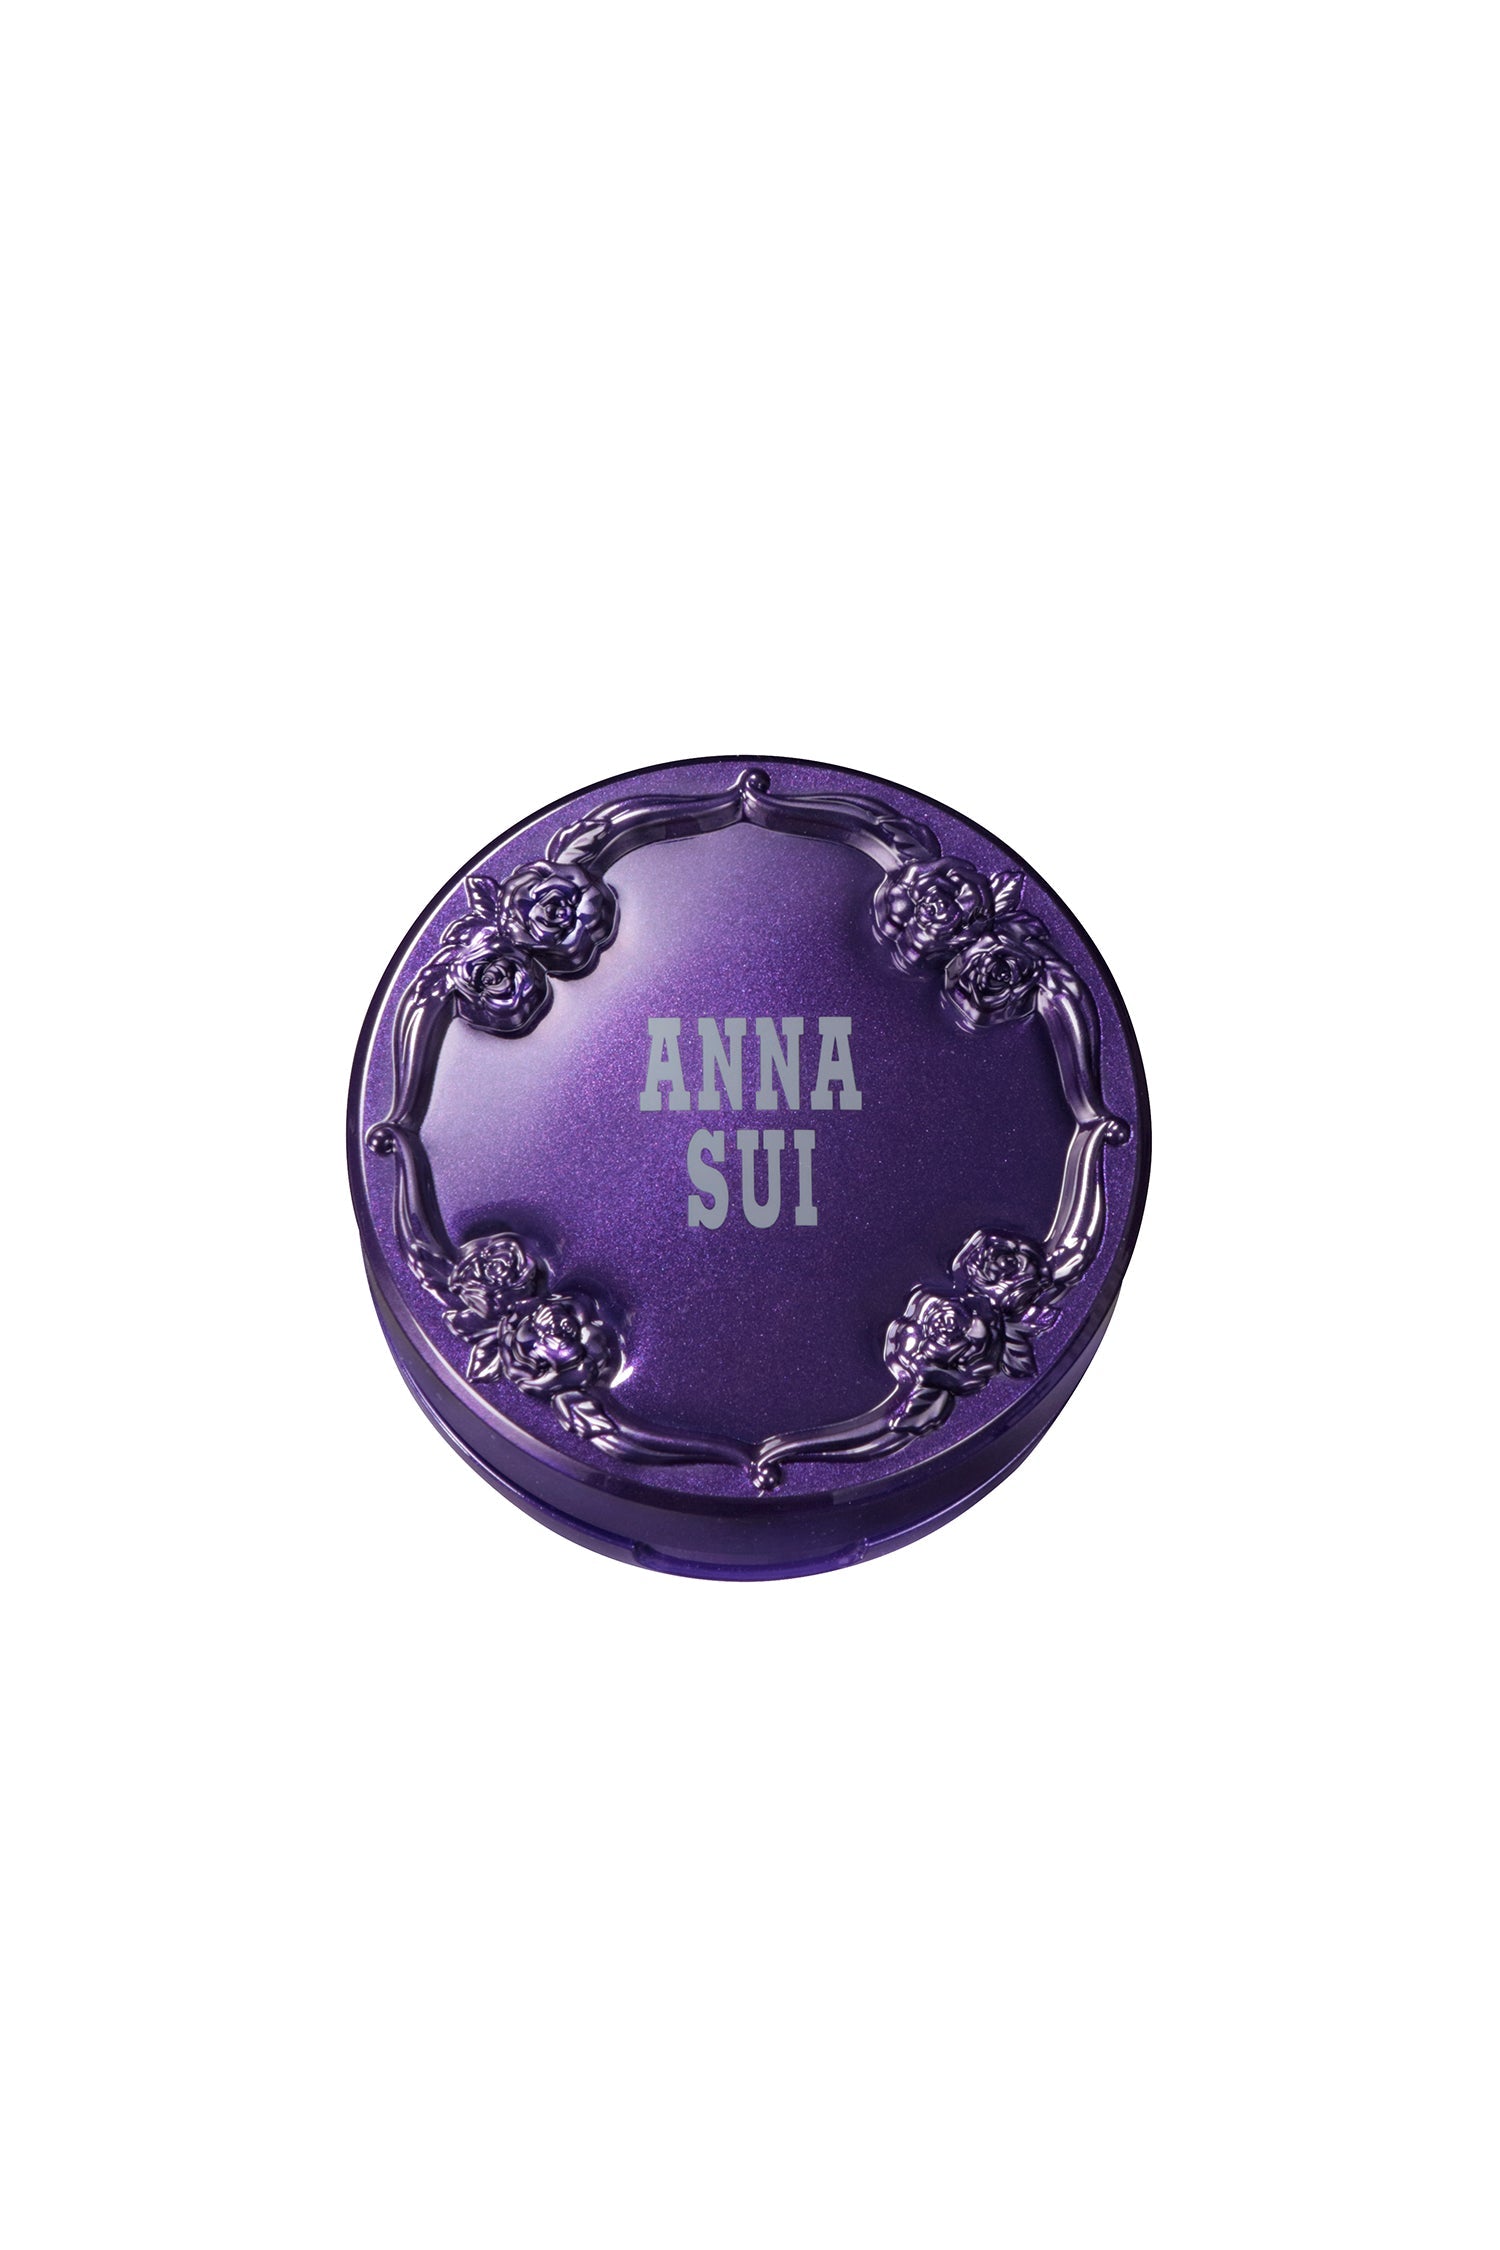 The round purple container, on the lid, a raised rose pattern and Anna Sui label